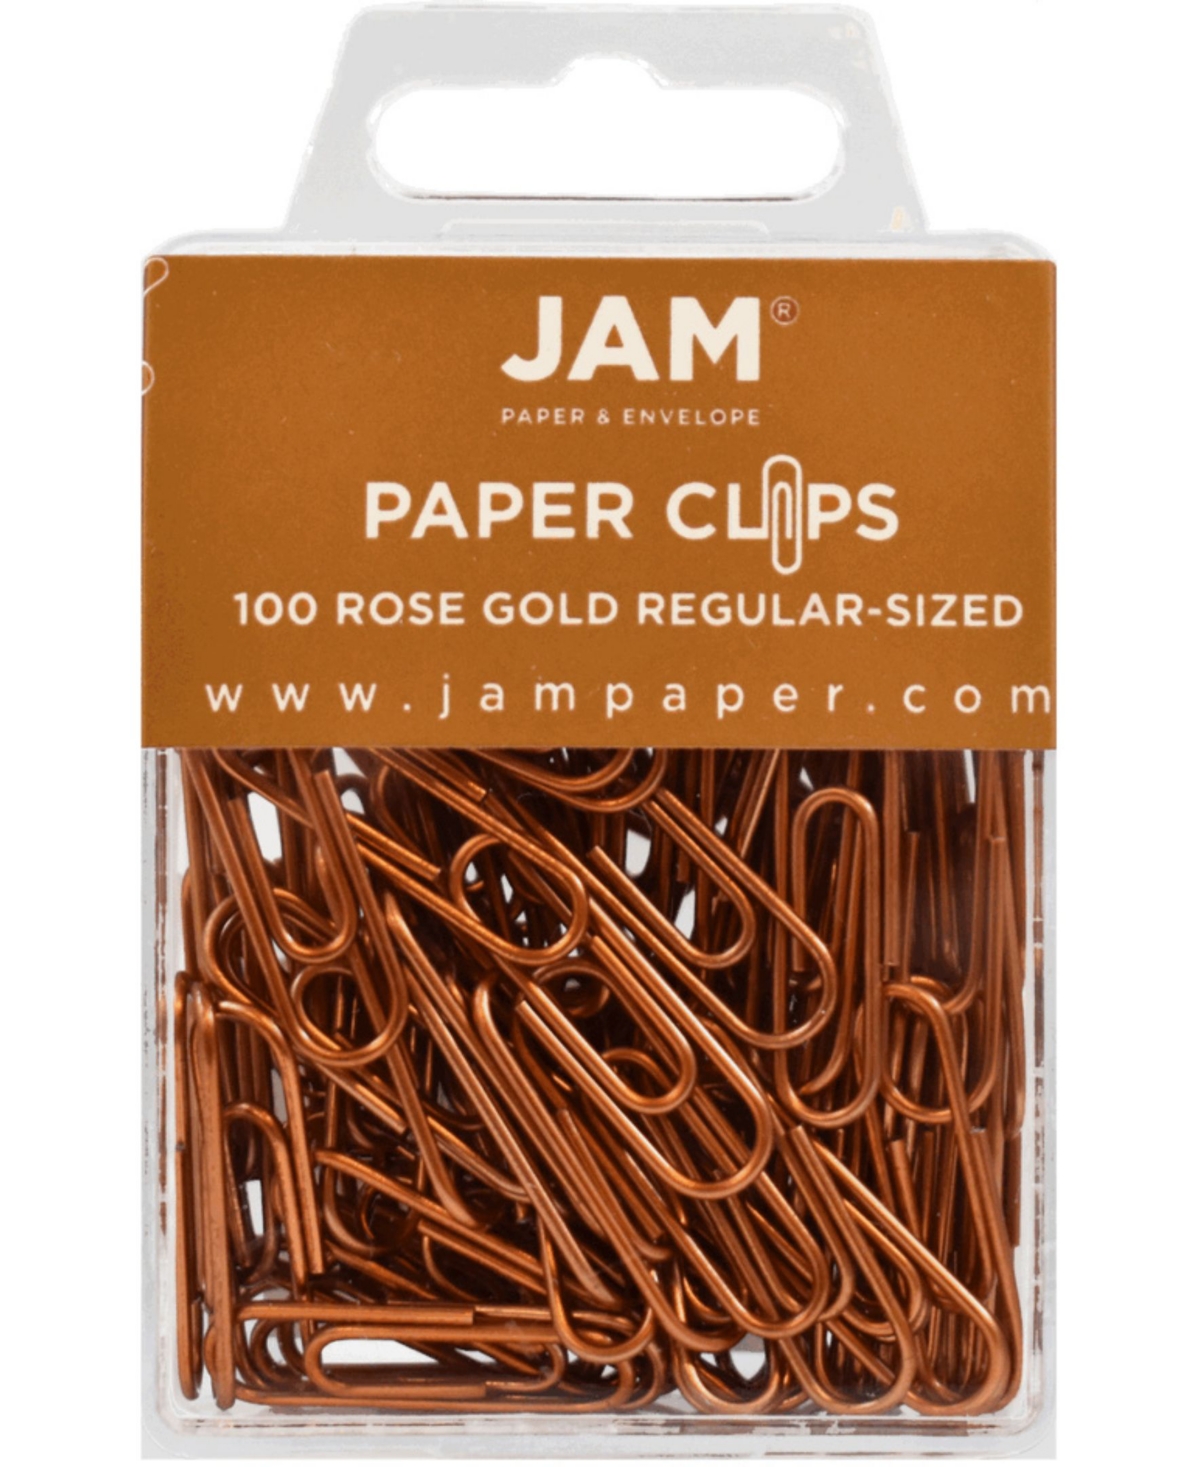 Colorful Standard Paper Clips - Regular 1" - Paperclips - 100 Per Pack - Rose Gold